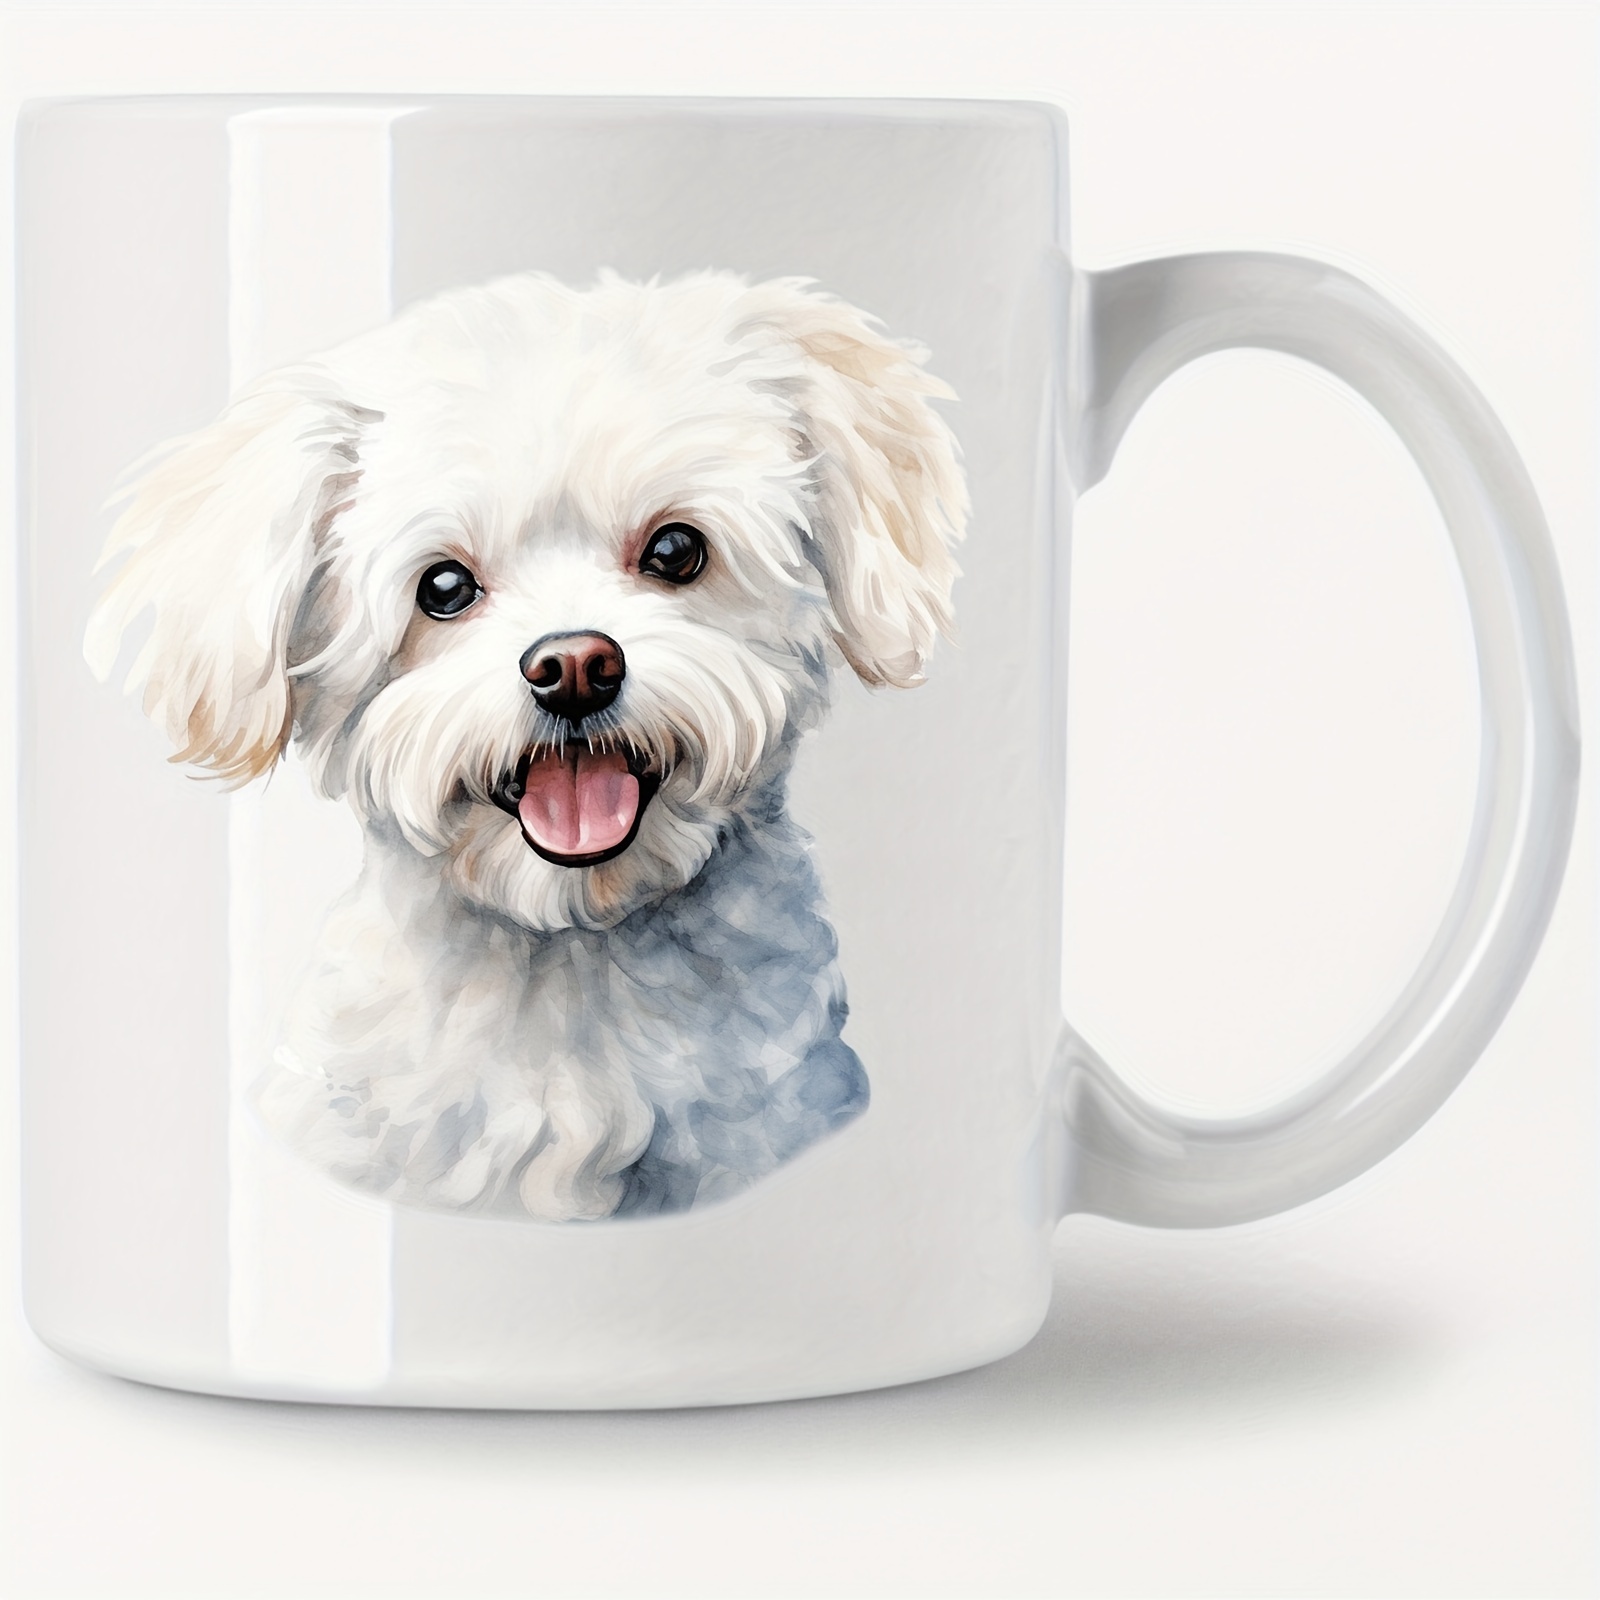 

Ceramic Dog-themed Coffee Mug - 11oz Bichon Frise Print, Dual-sided Design, Microwave & Dishwasher Safe, Novelty Drinkware For Hot And Cold Beverages, Ideal Gift - 1pc